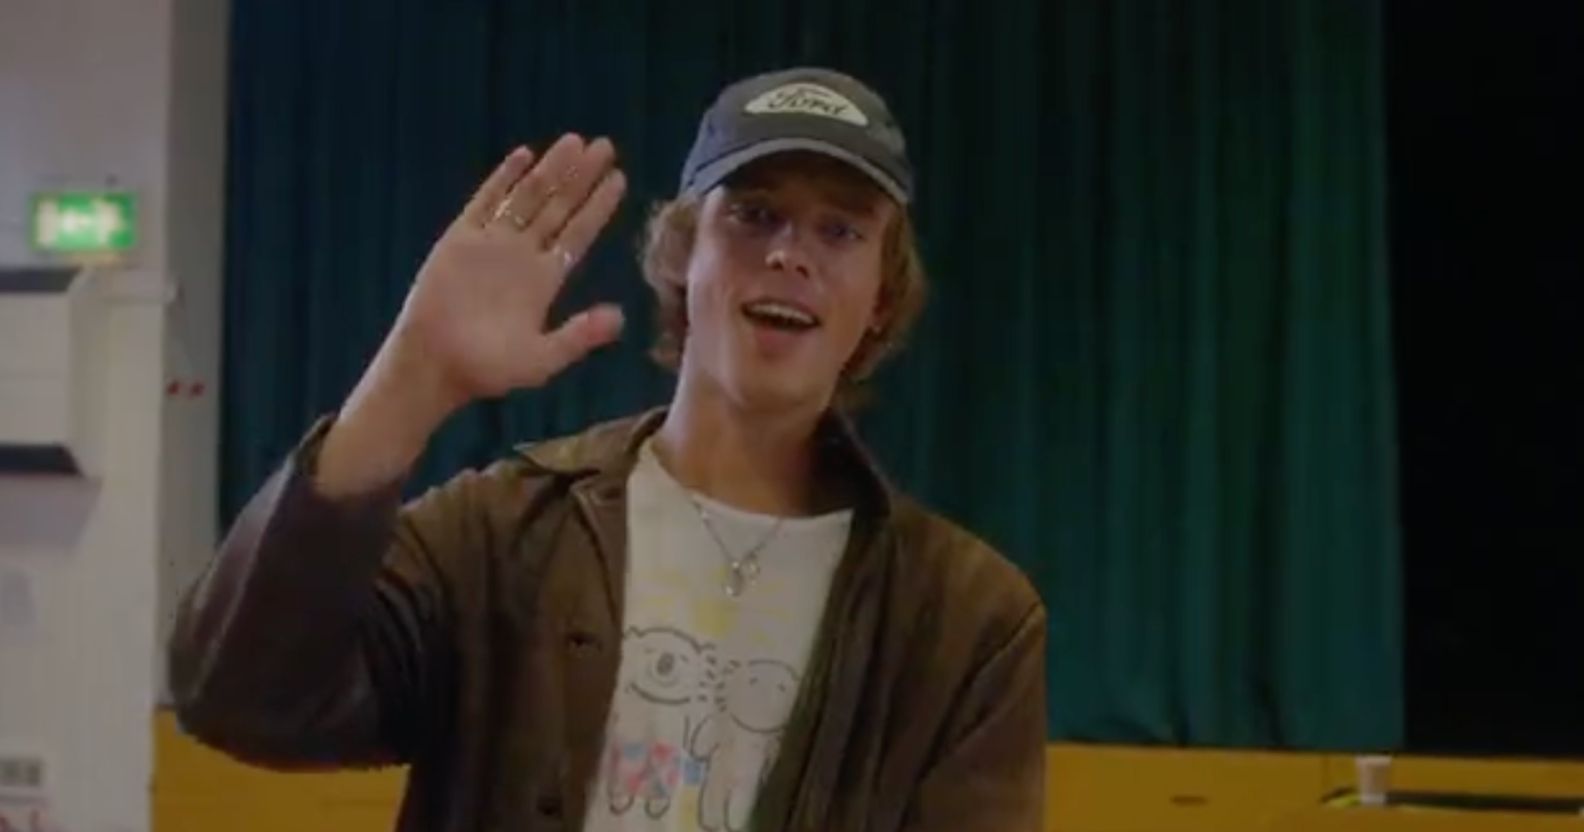 Actor Jack Barton waves during a reading for Heartstopper season 2, in which he plays David Nelson